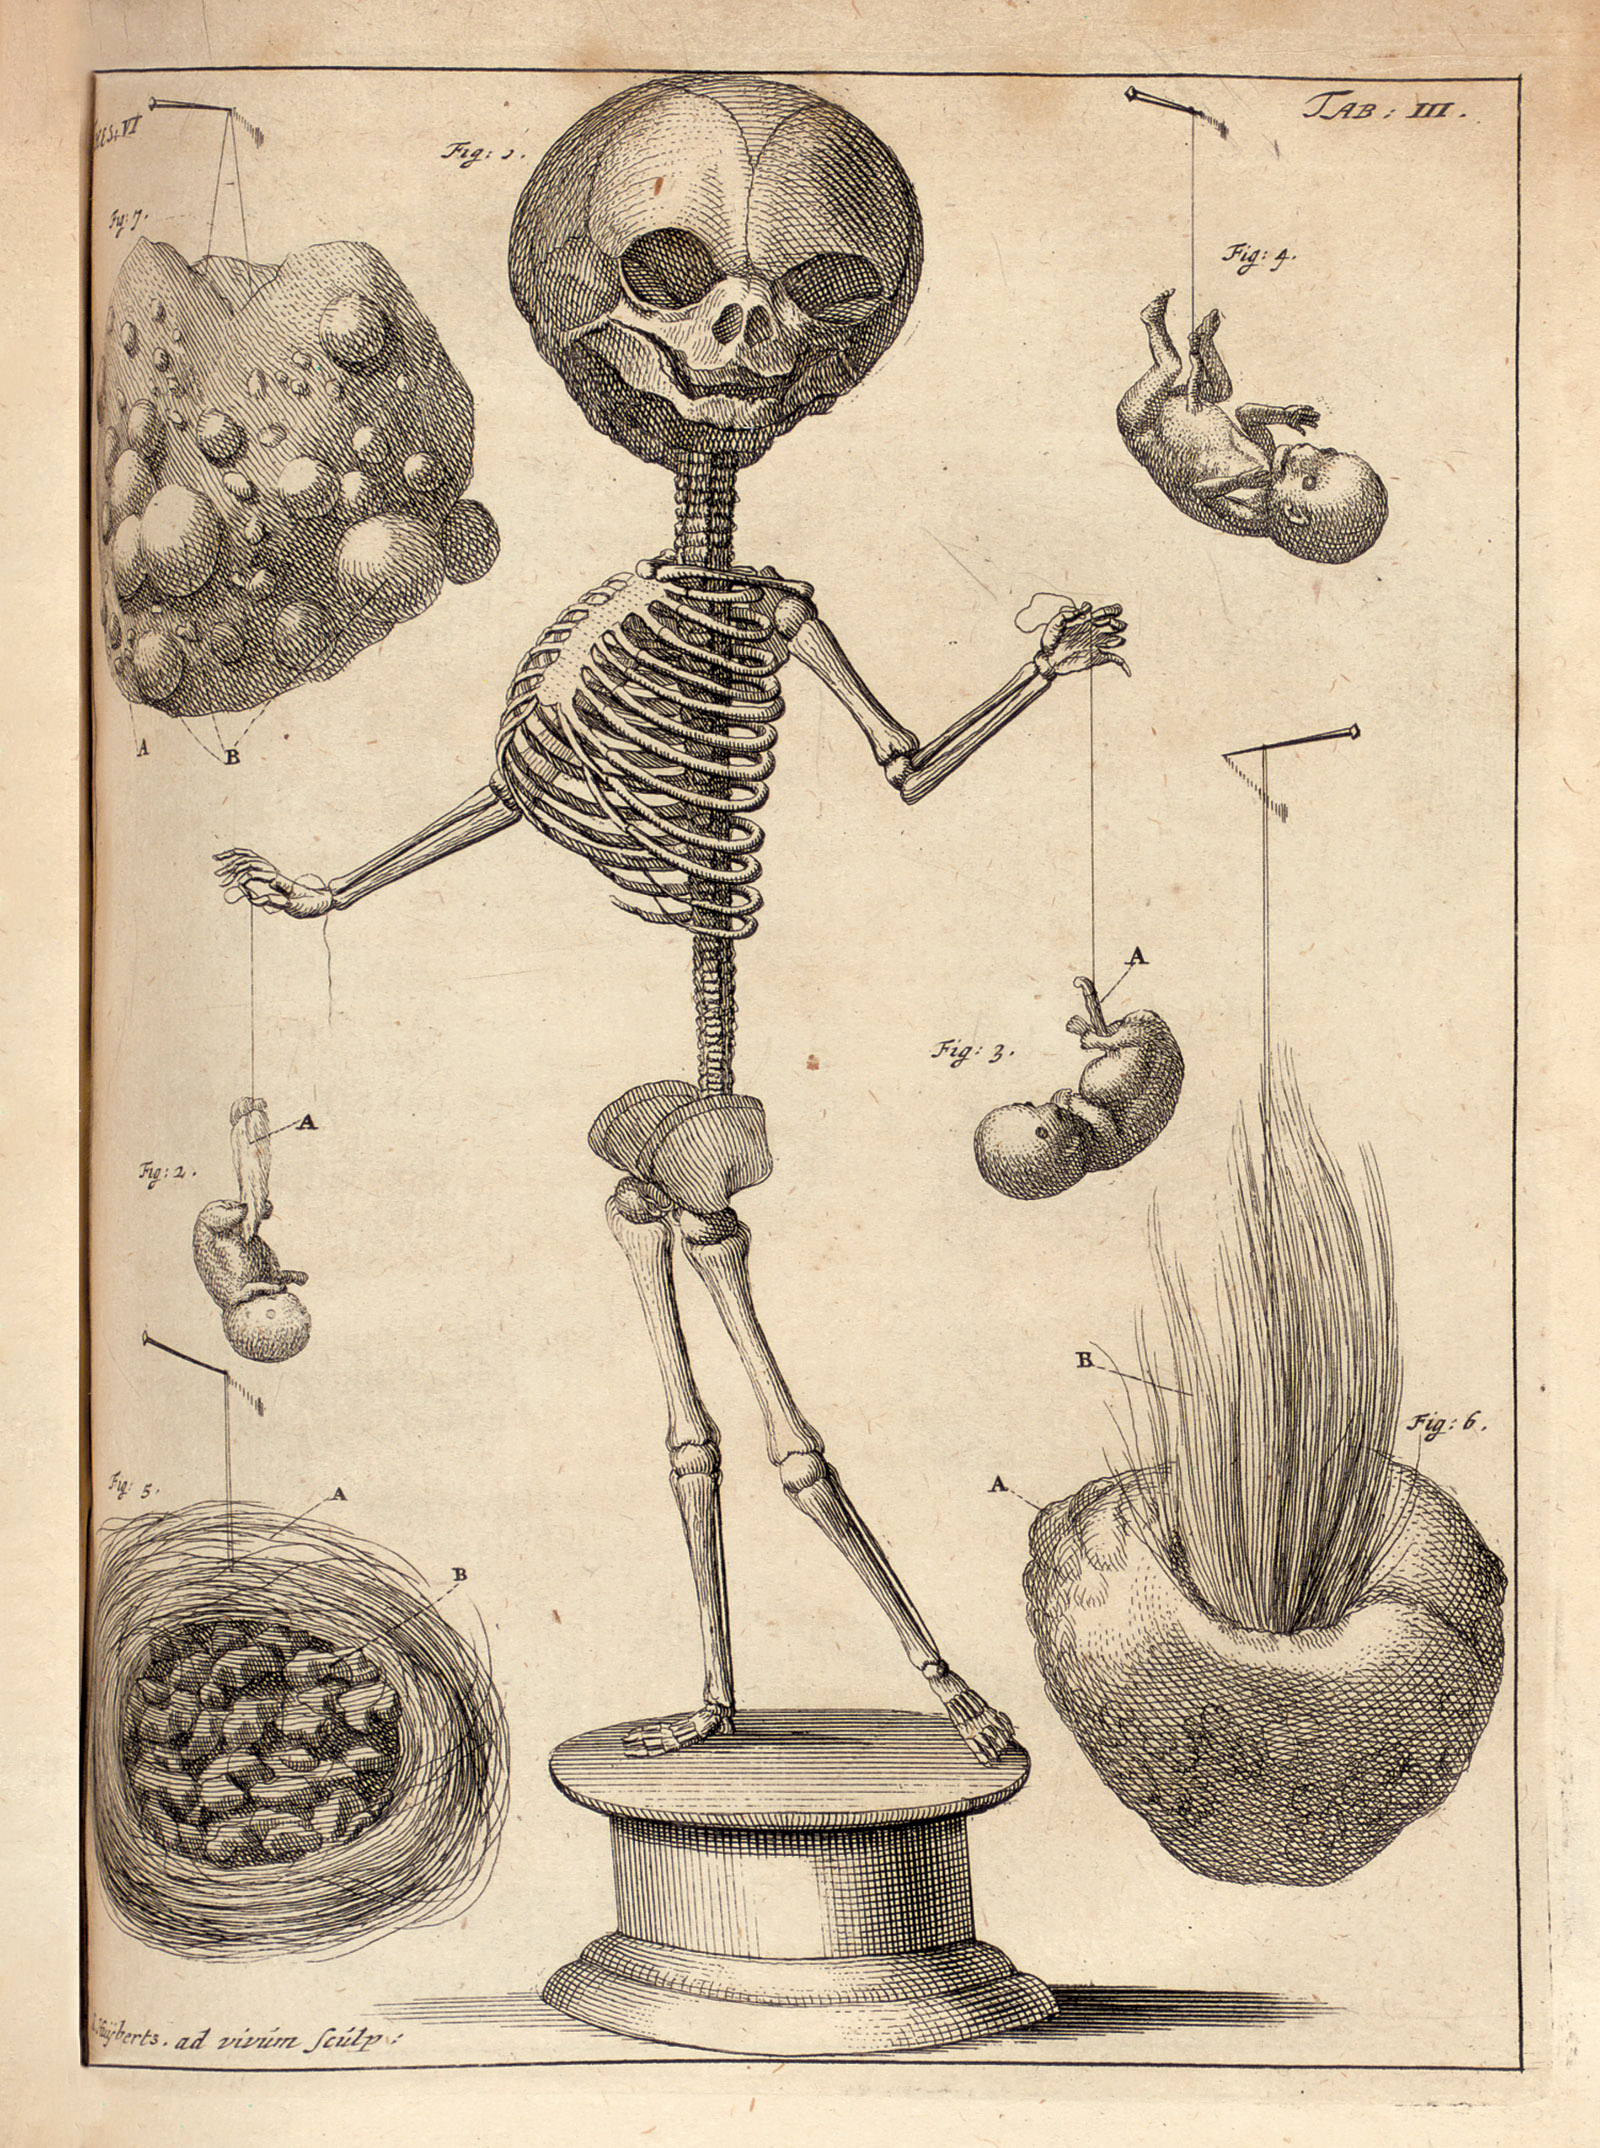 Engraving depicting the skeleton of a four-month-old infant with human embryos, a human placenta, and scar tissue and hair from a cow’s neck